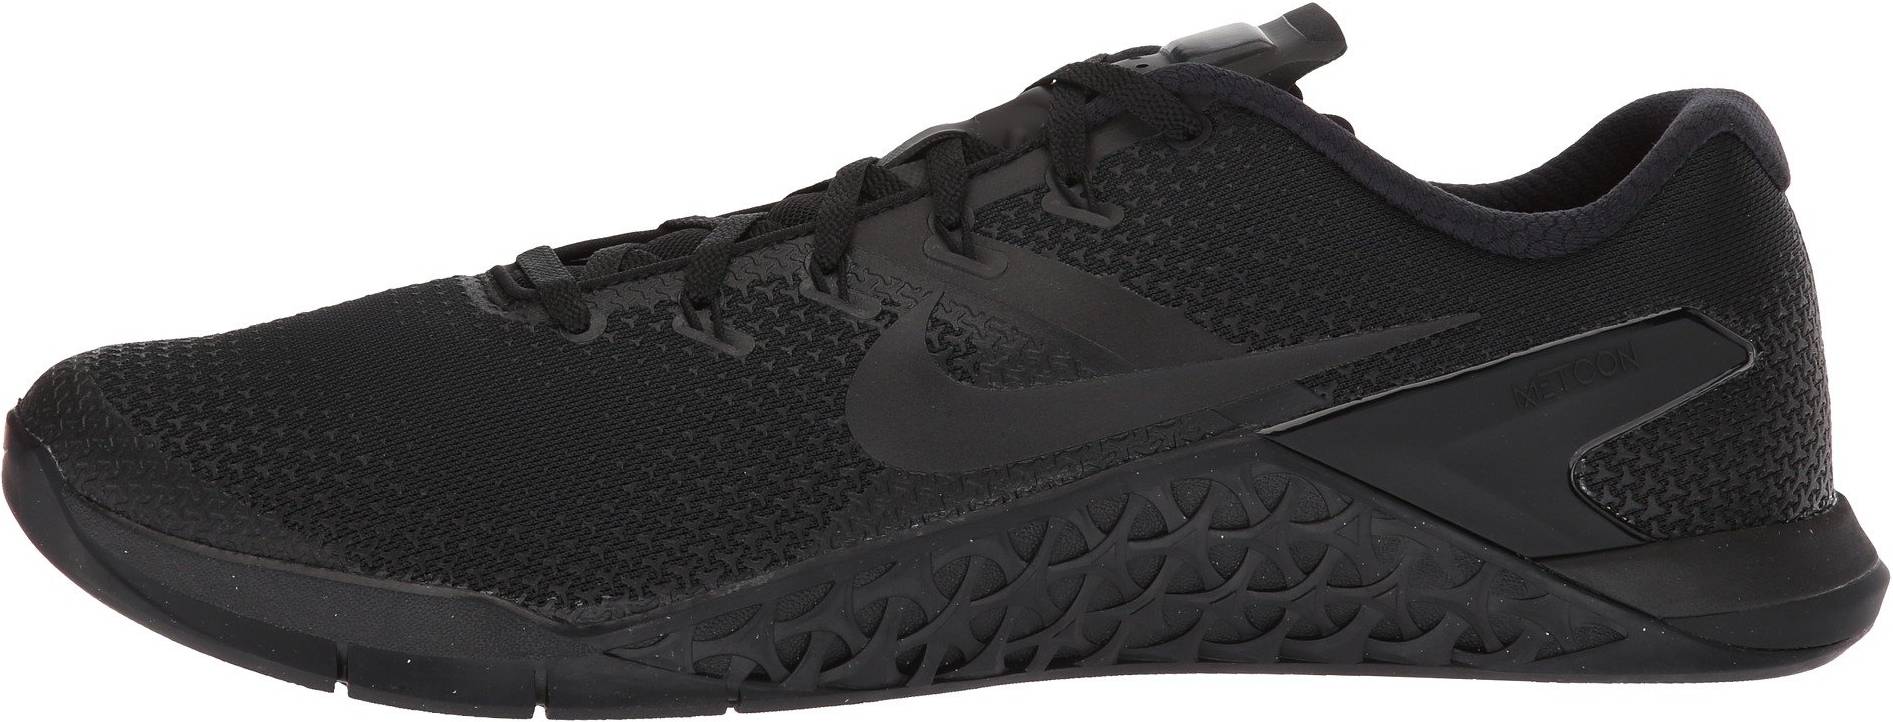 Save 49% on Nike Crossfit Shoes (17 